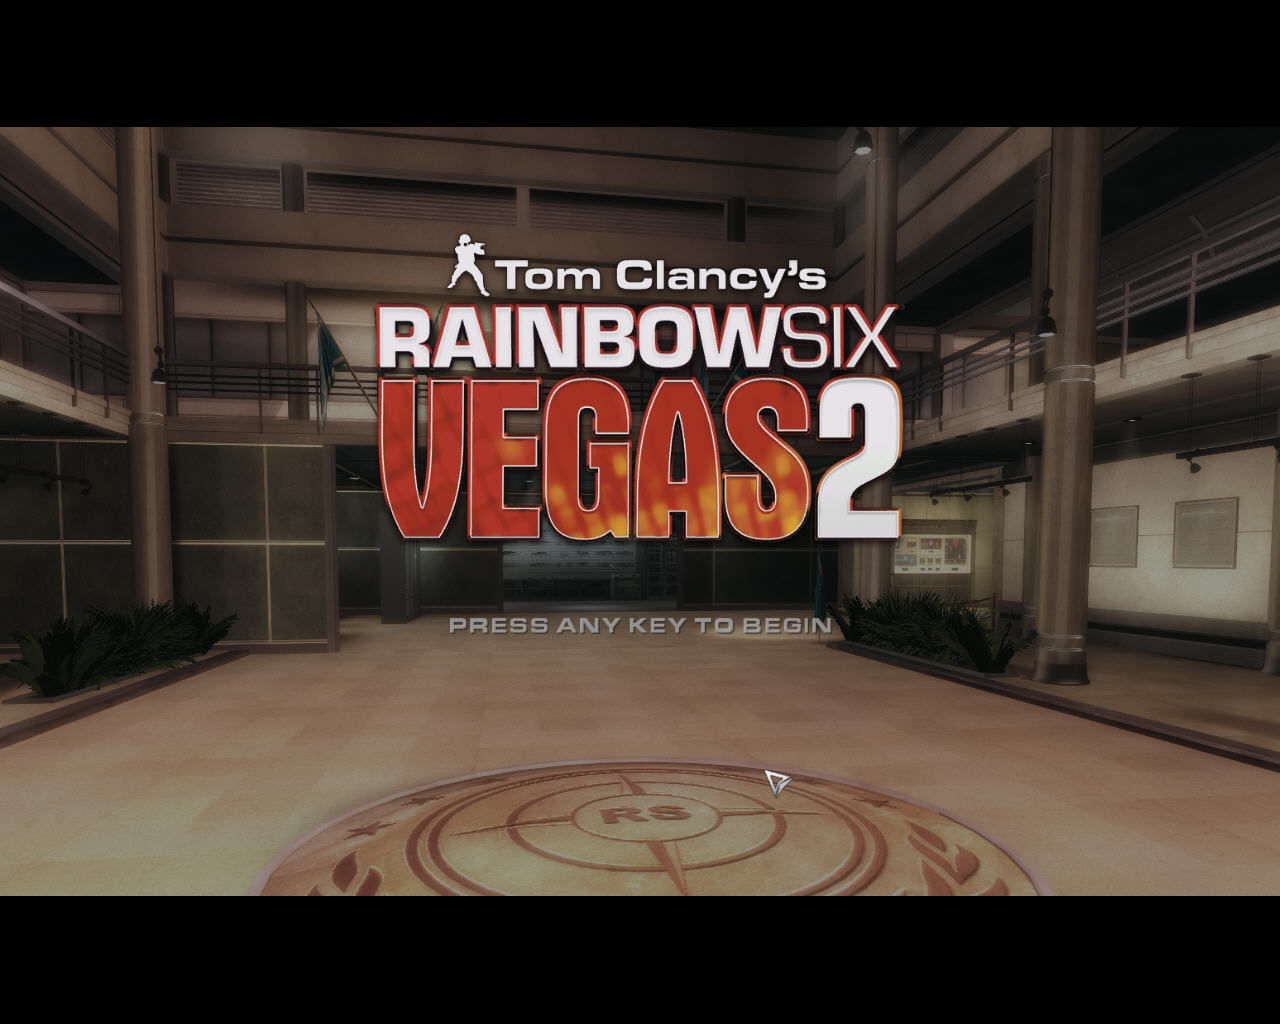 Tom Clancy's Rainbow Six: Vegas 2 - PlayStation 3 (PS3) Game